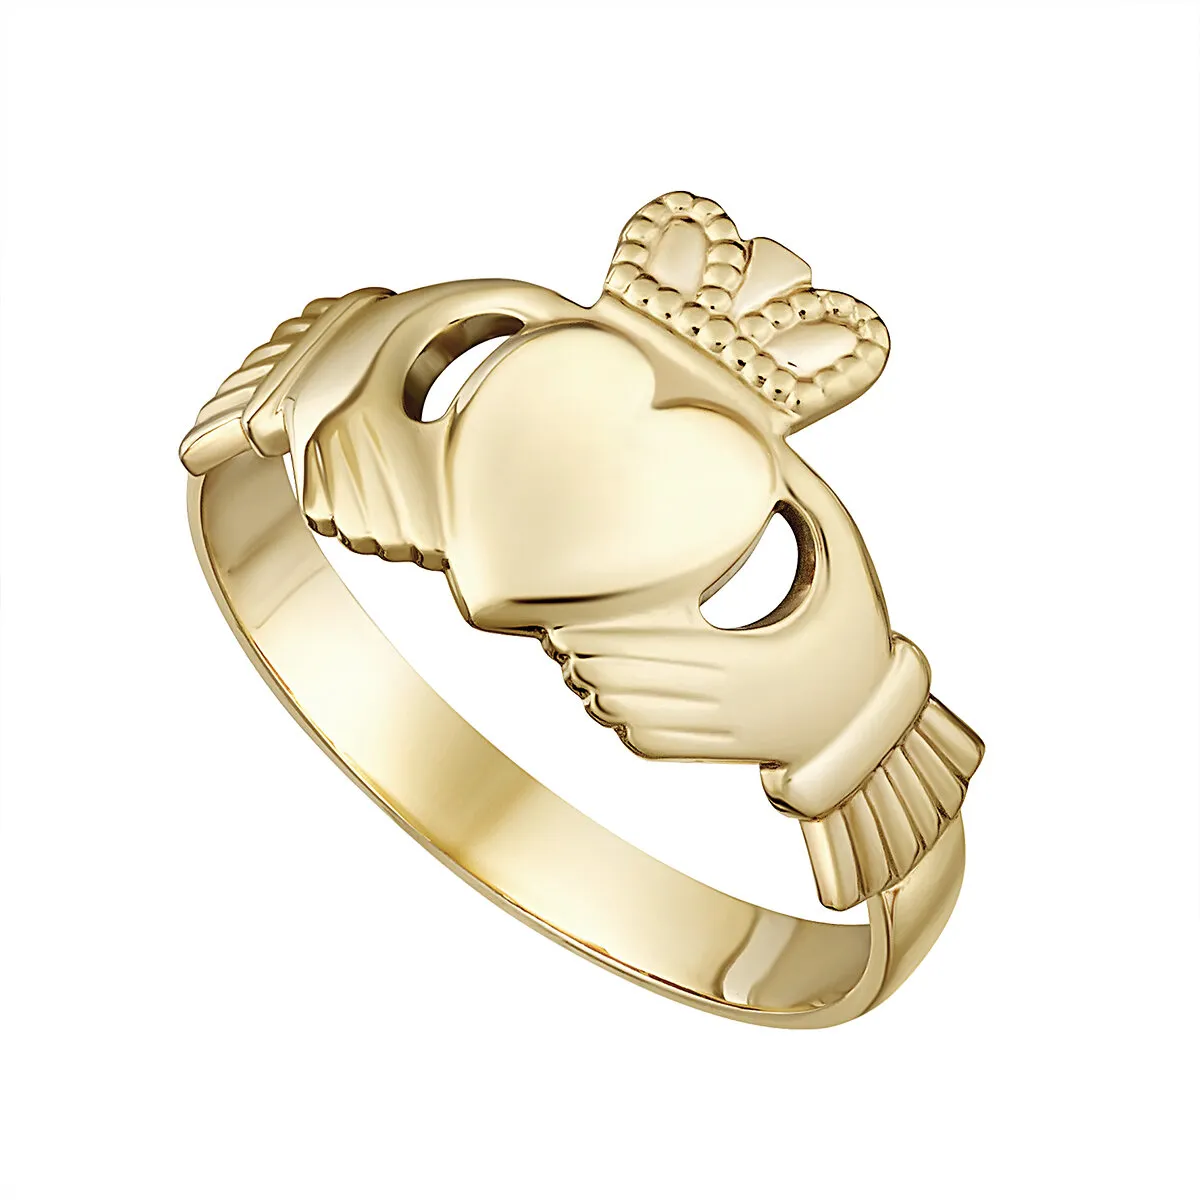 10k Gold Gents Claddagh Ring